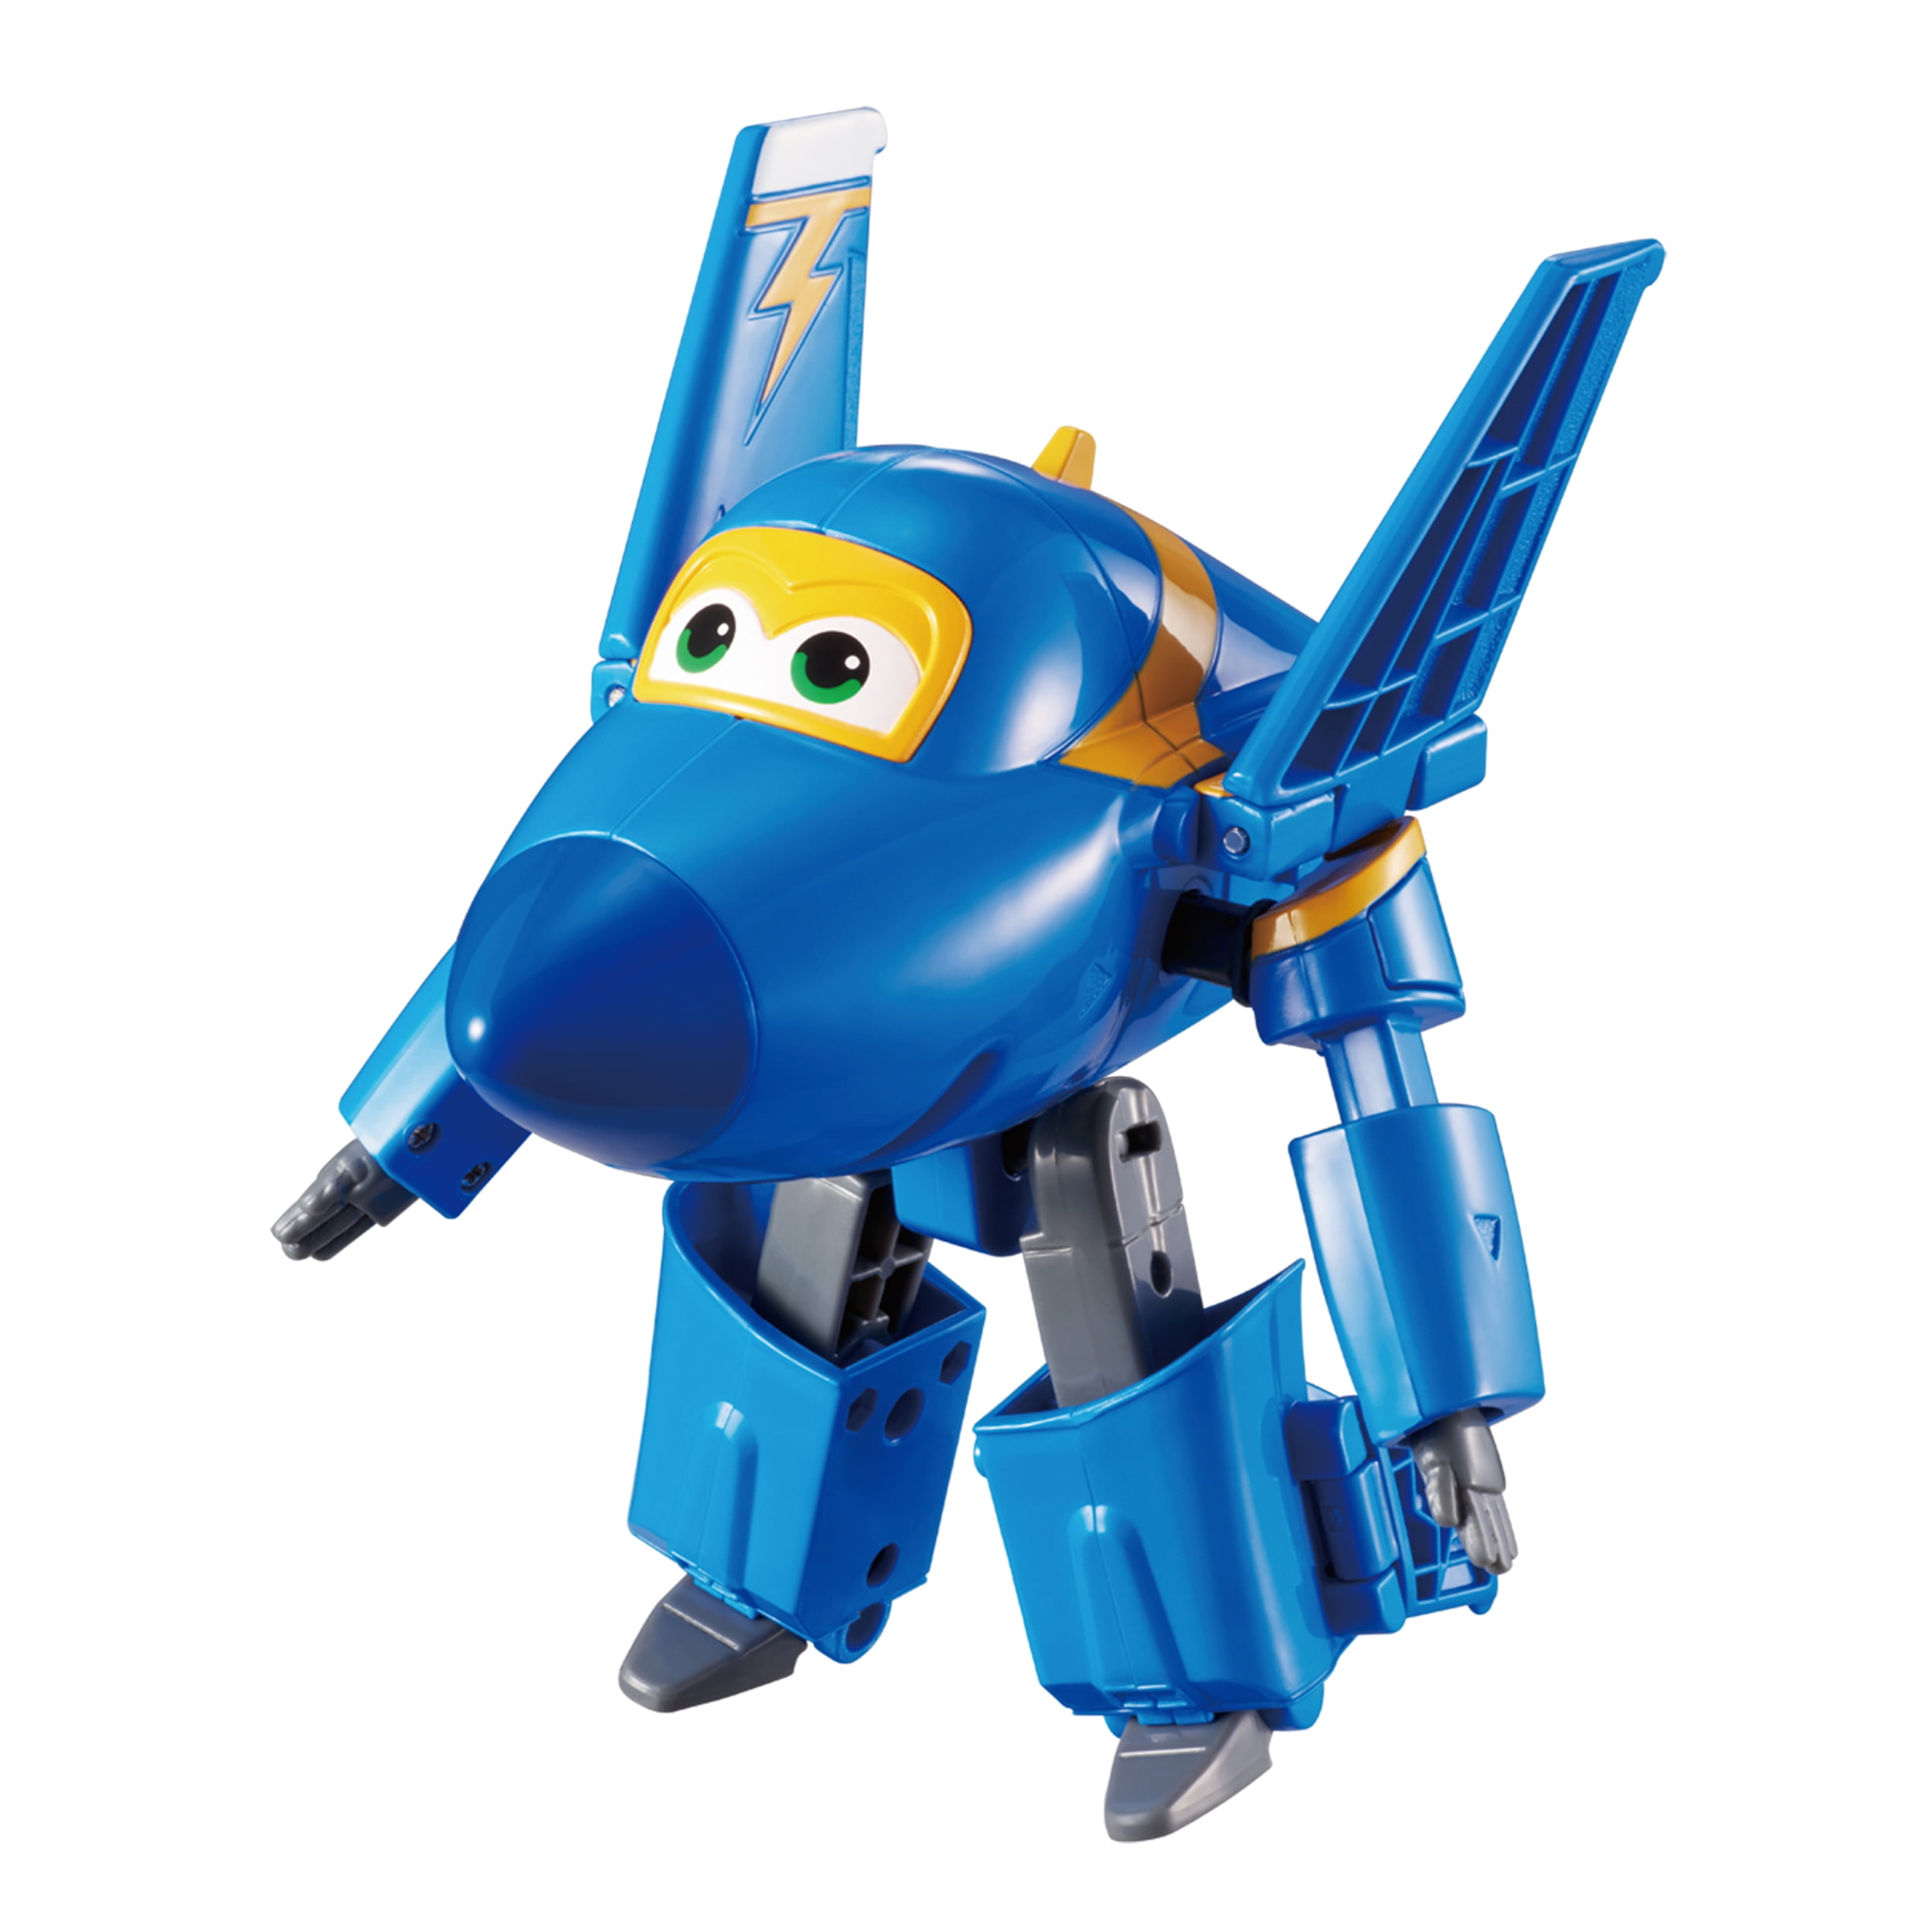 Auldey Toys - Super Wings Transforming Character, Jerome